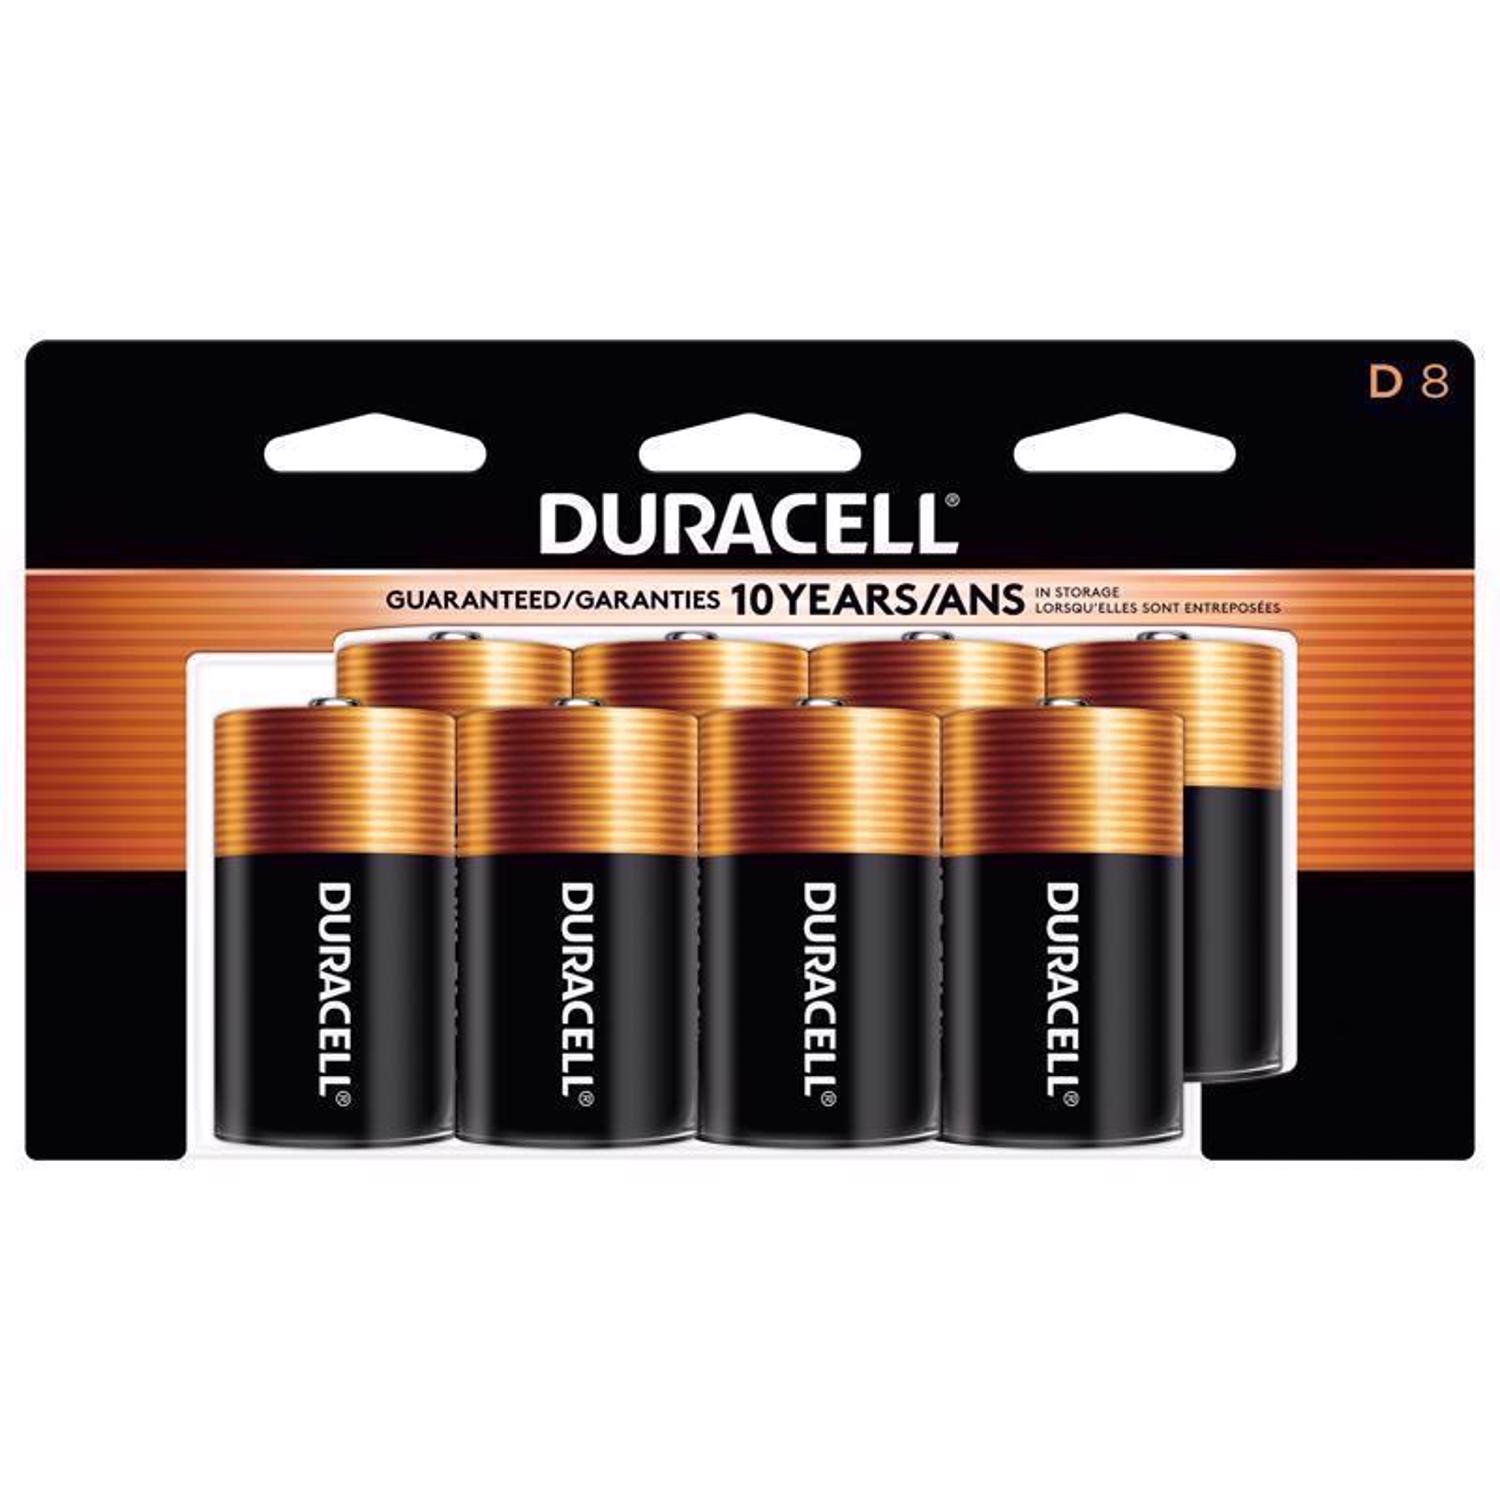 Photos - Household Switch Duracell Coppertop D Alkaline Batteries 8 pk Carded MN13R8DWZ0017 